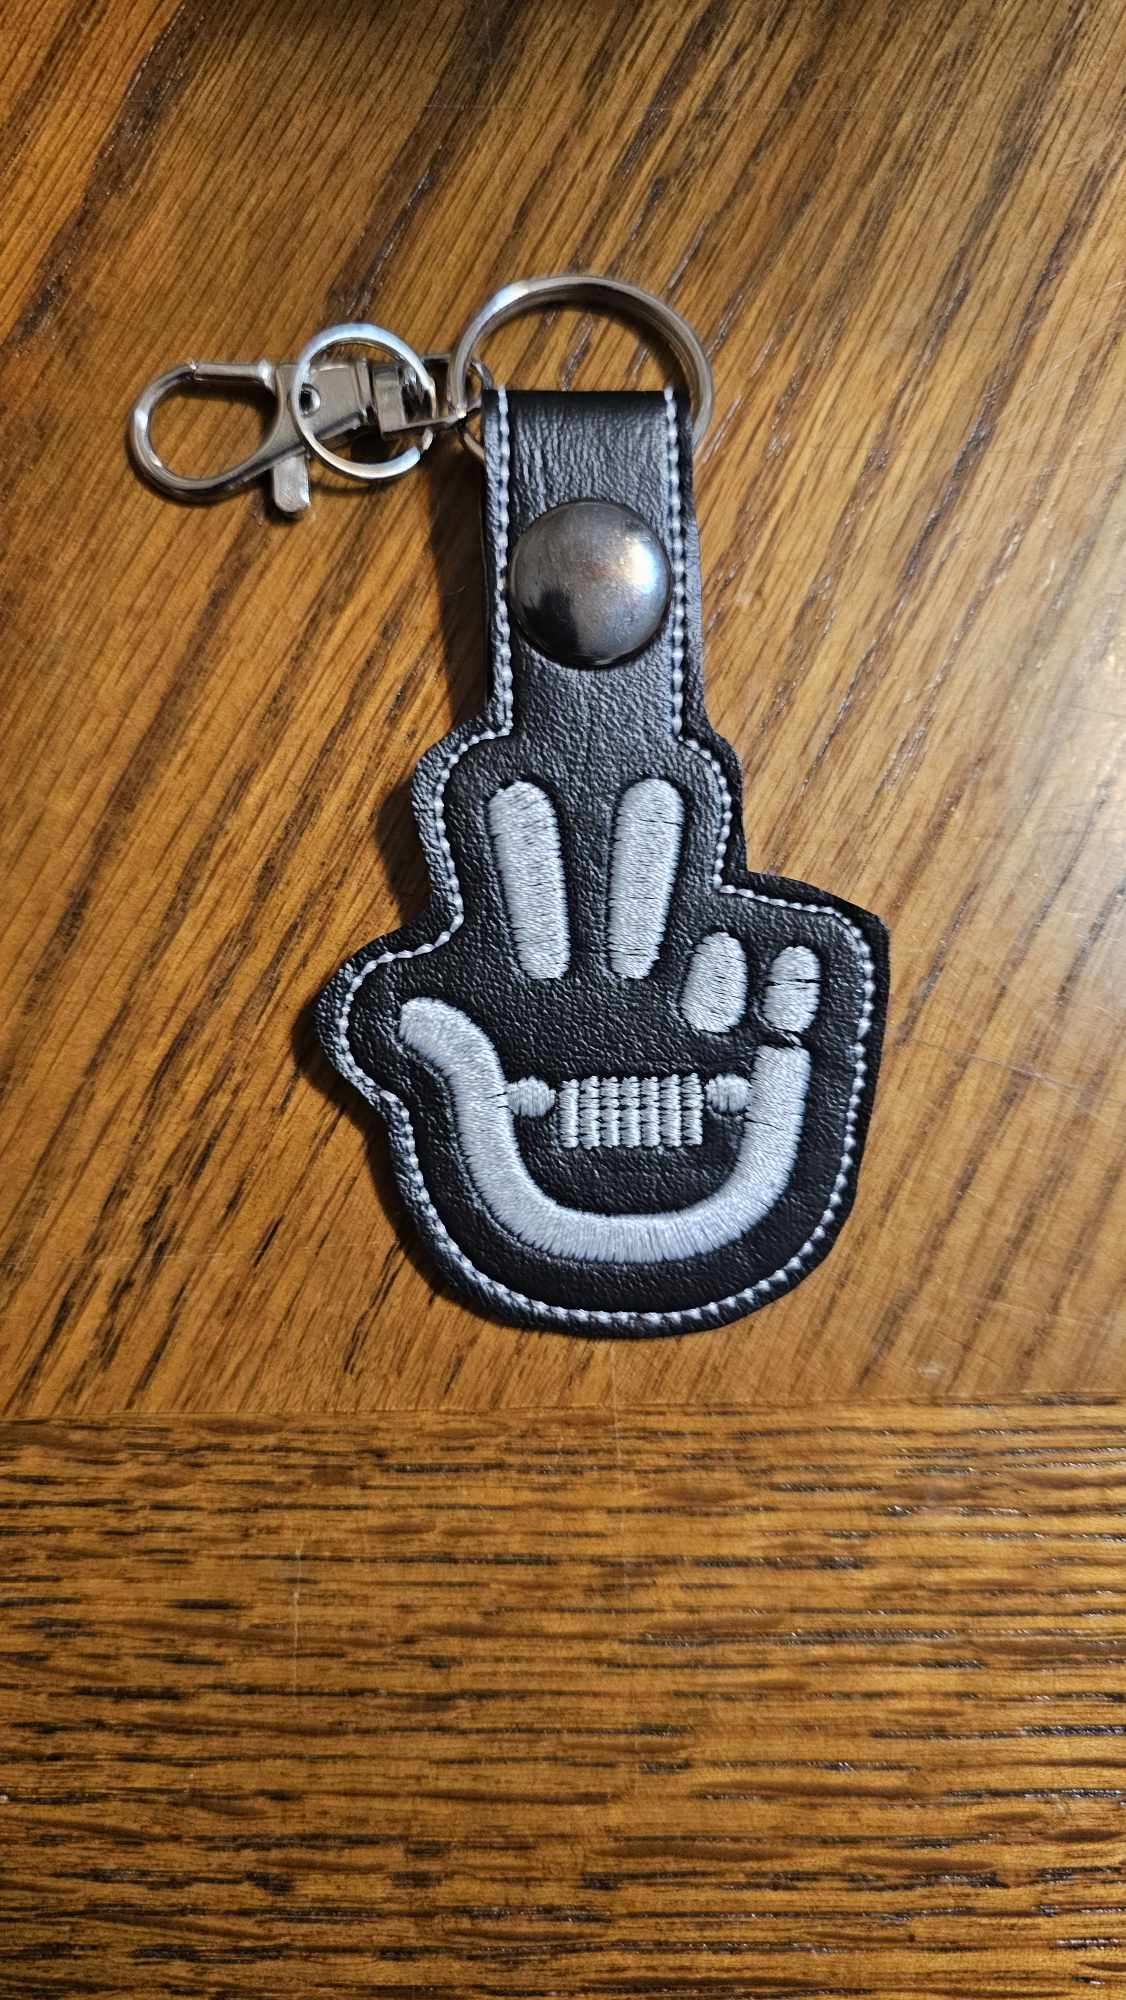 Custom Embroidered key chains